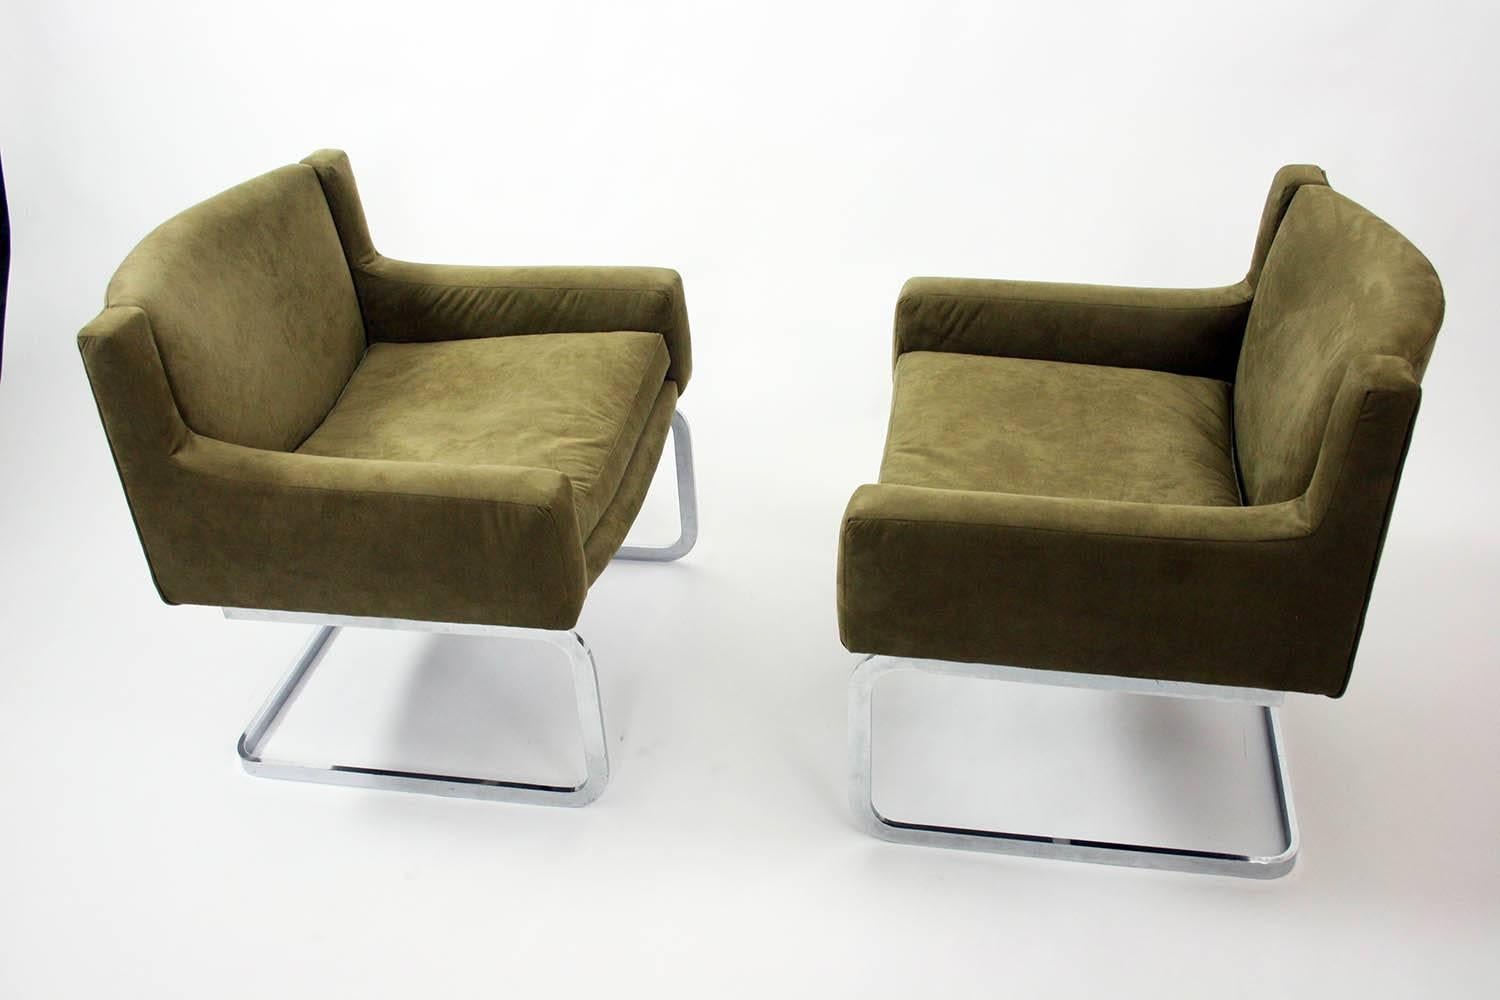 Pair of rare armchairs designed by Robert Haussmann for De Sede in 1957. It has olive upholstery with a steel structure. Both remain in excellent condition.

Dimensions: 28